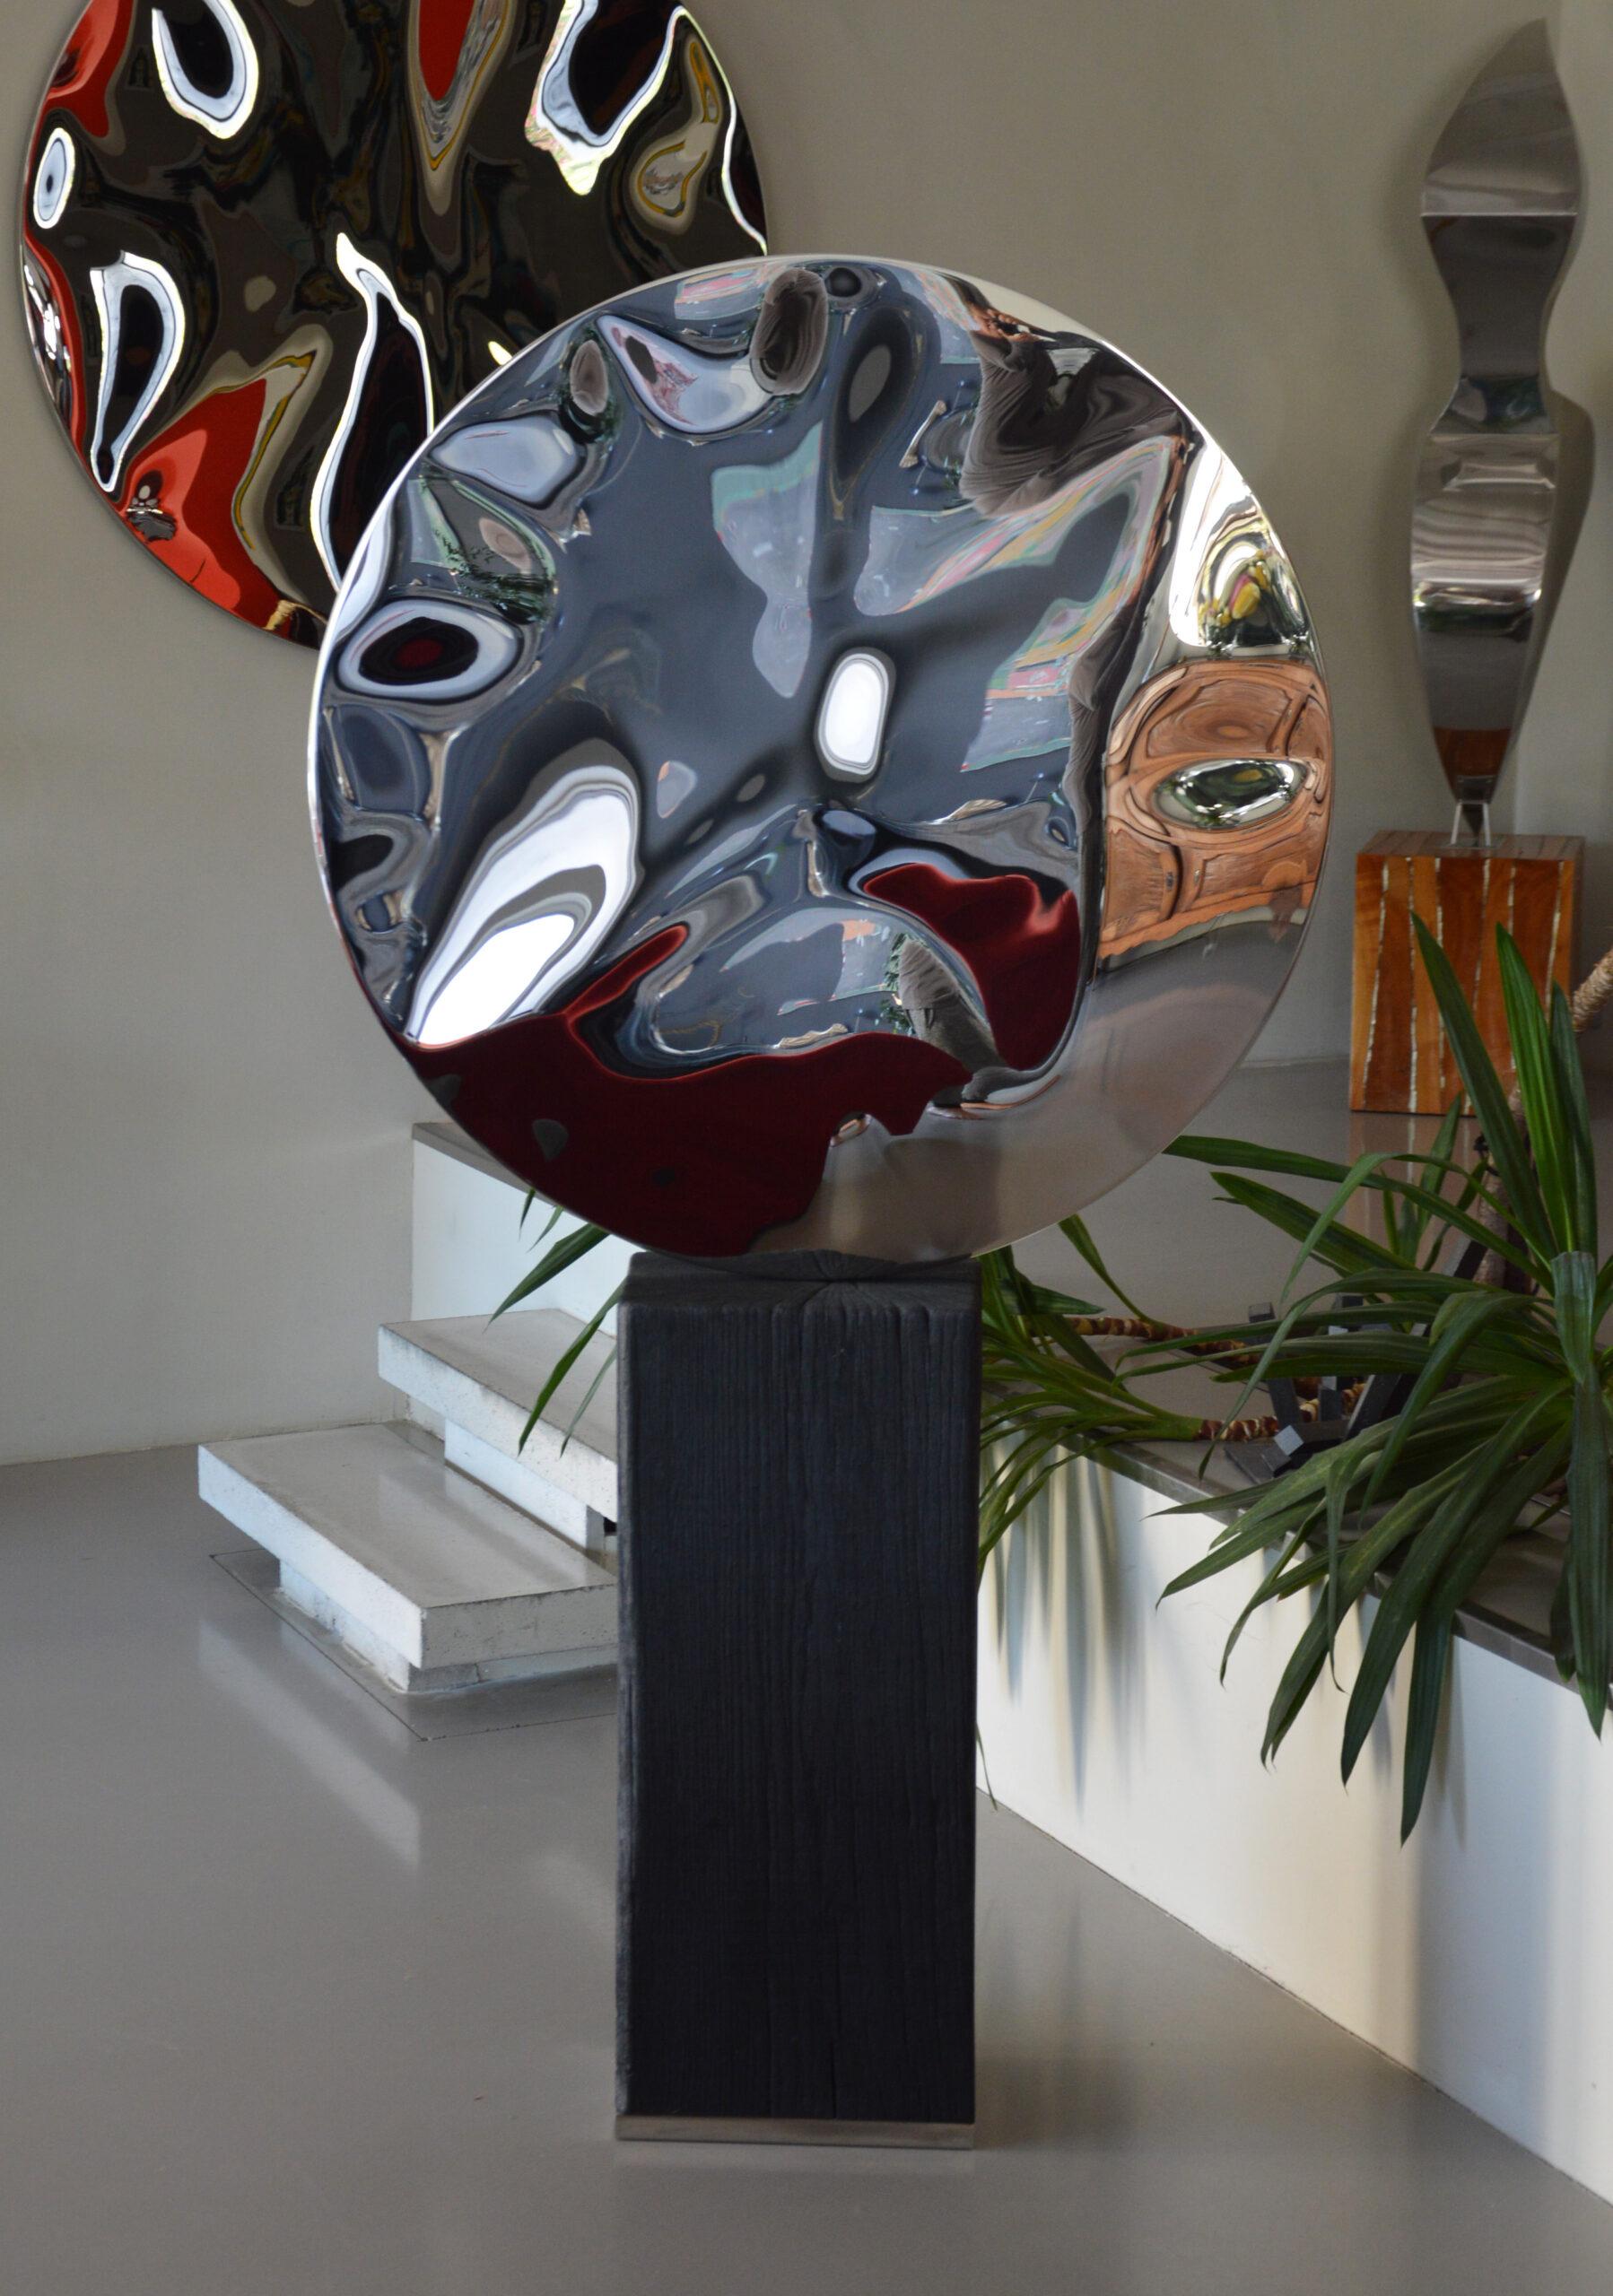 “Shattered” mirror II by Franck K - Stainless steel sculpture, reflection, light